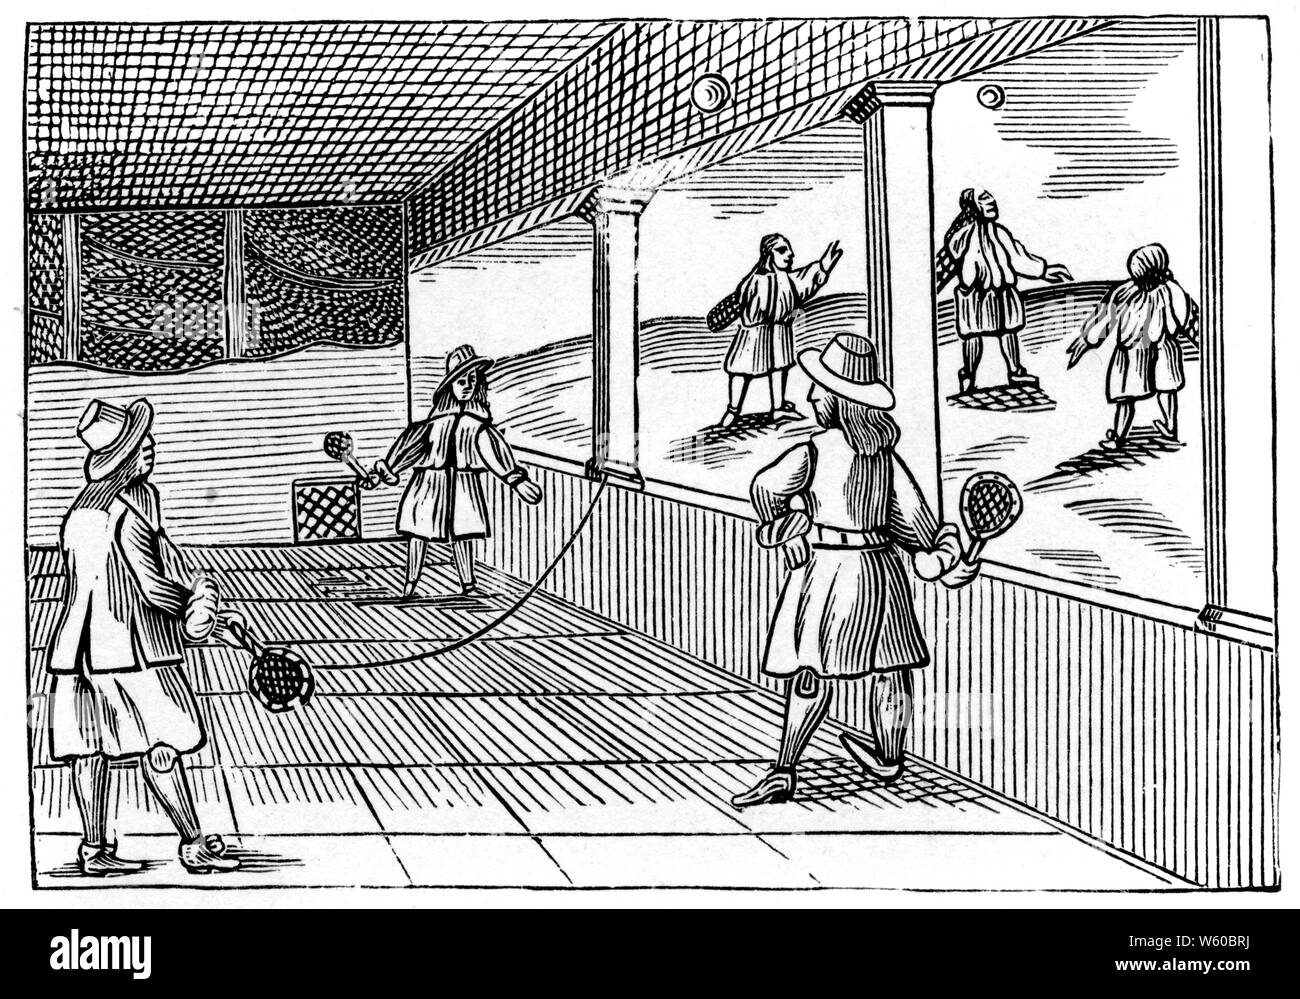 A game of tennis, 1659. Real tennis is the original racquet sport from which the modern game of tennis is derived. It is also known as court tennis in the United States, formerly royal tennis in England and Australia and courte-paume in France. The game thrived among the 17th century nobility of France, Spain, Italy, the Netherlands, and the Habsburg Empire. Stock Photo